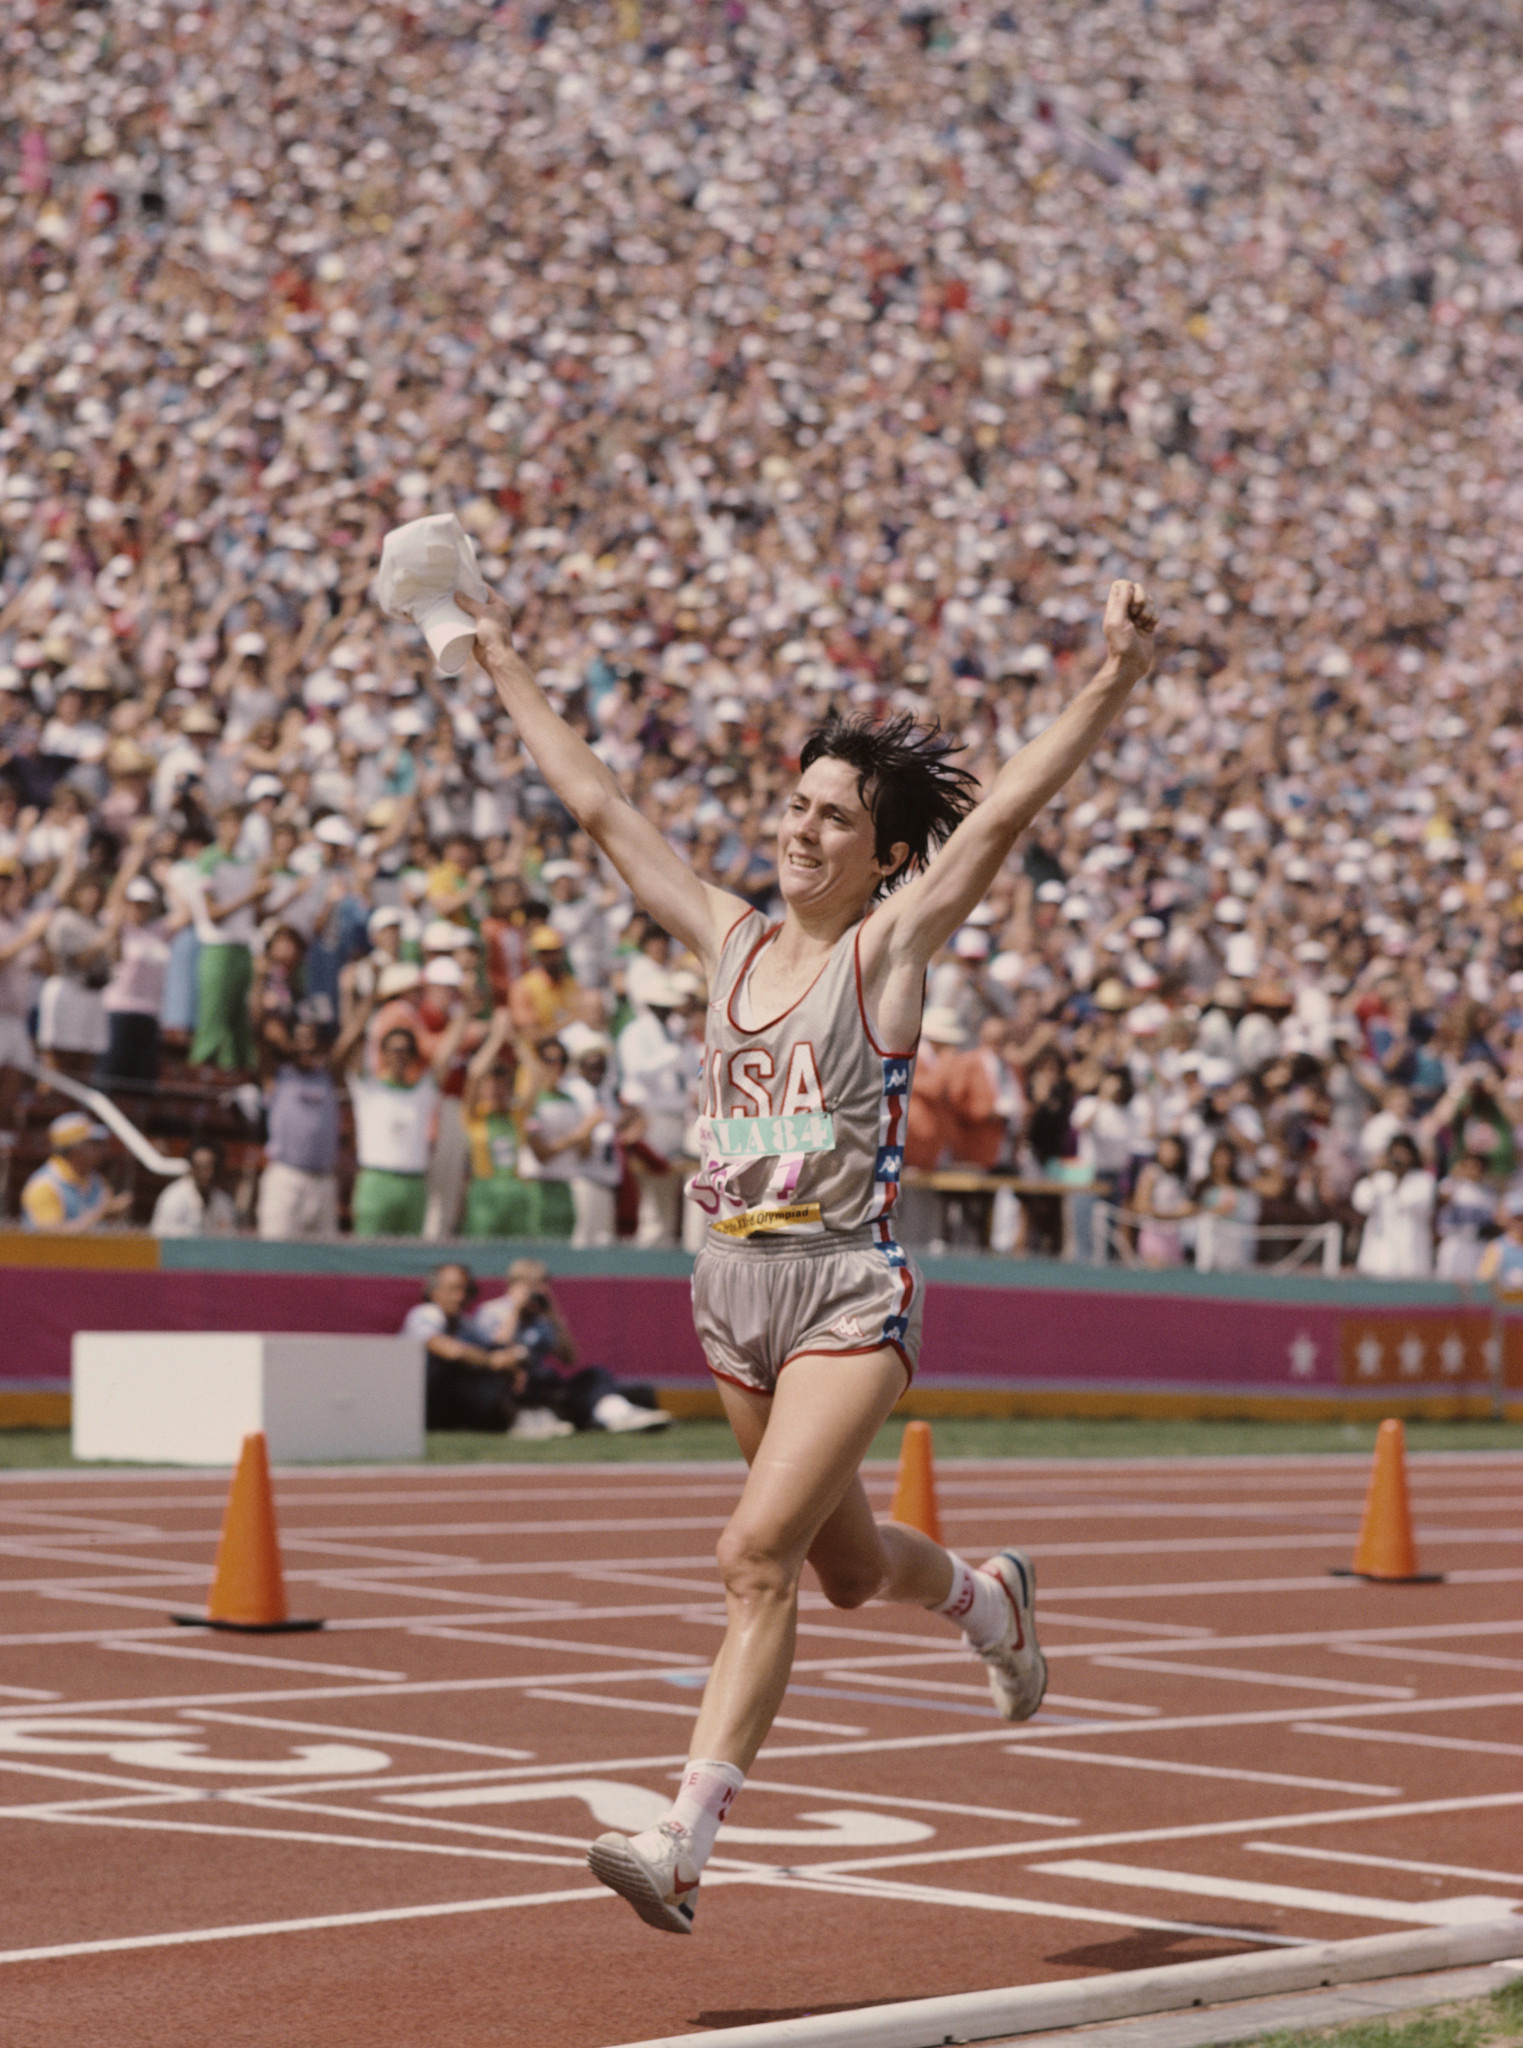 America's Joan Benoit won the gold medal in the first Olympic marathon for women held at Los Angeles 1984 ©Getty Images